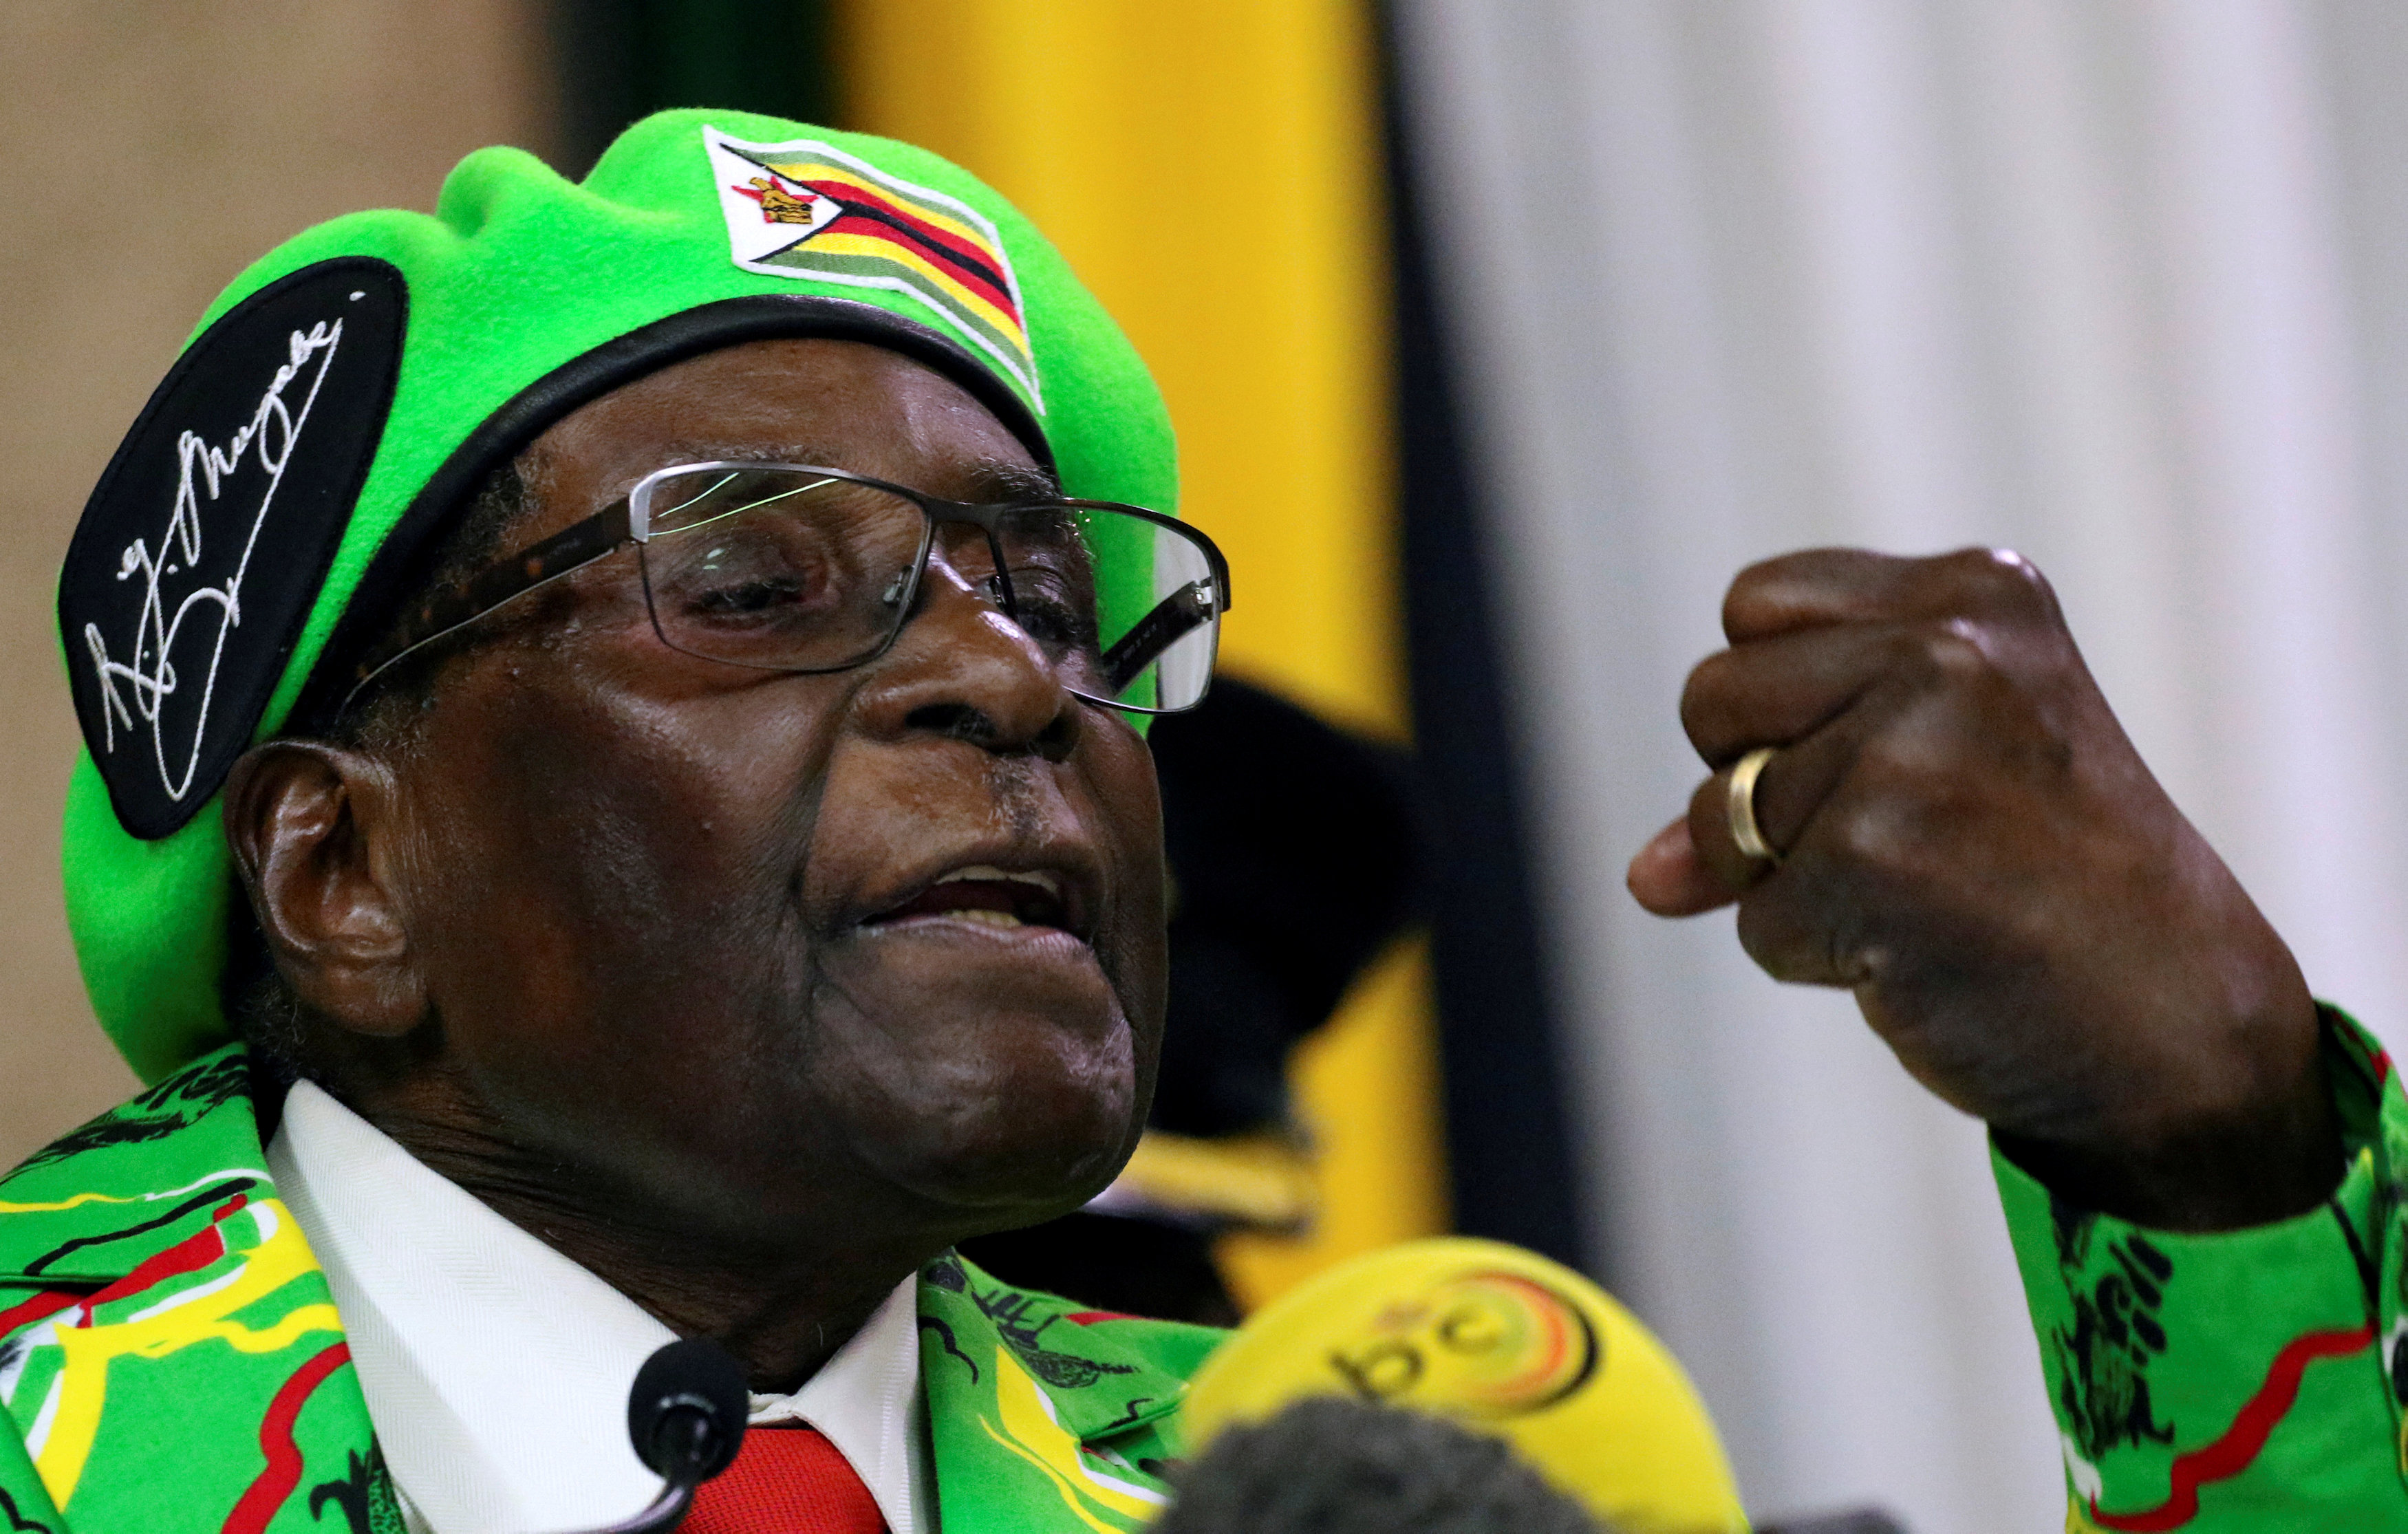 Mugabe would have rejected WHO goodwill envoy role, says Zimbabwean president's spokesman